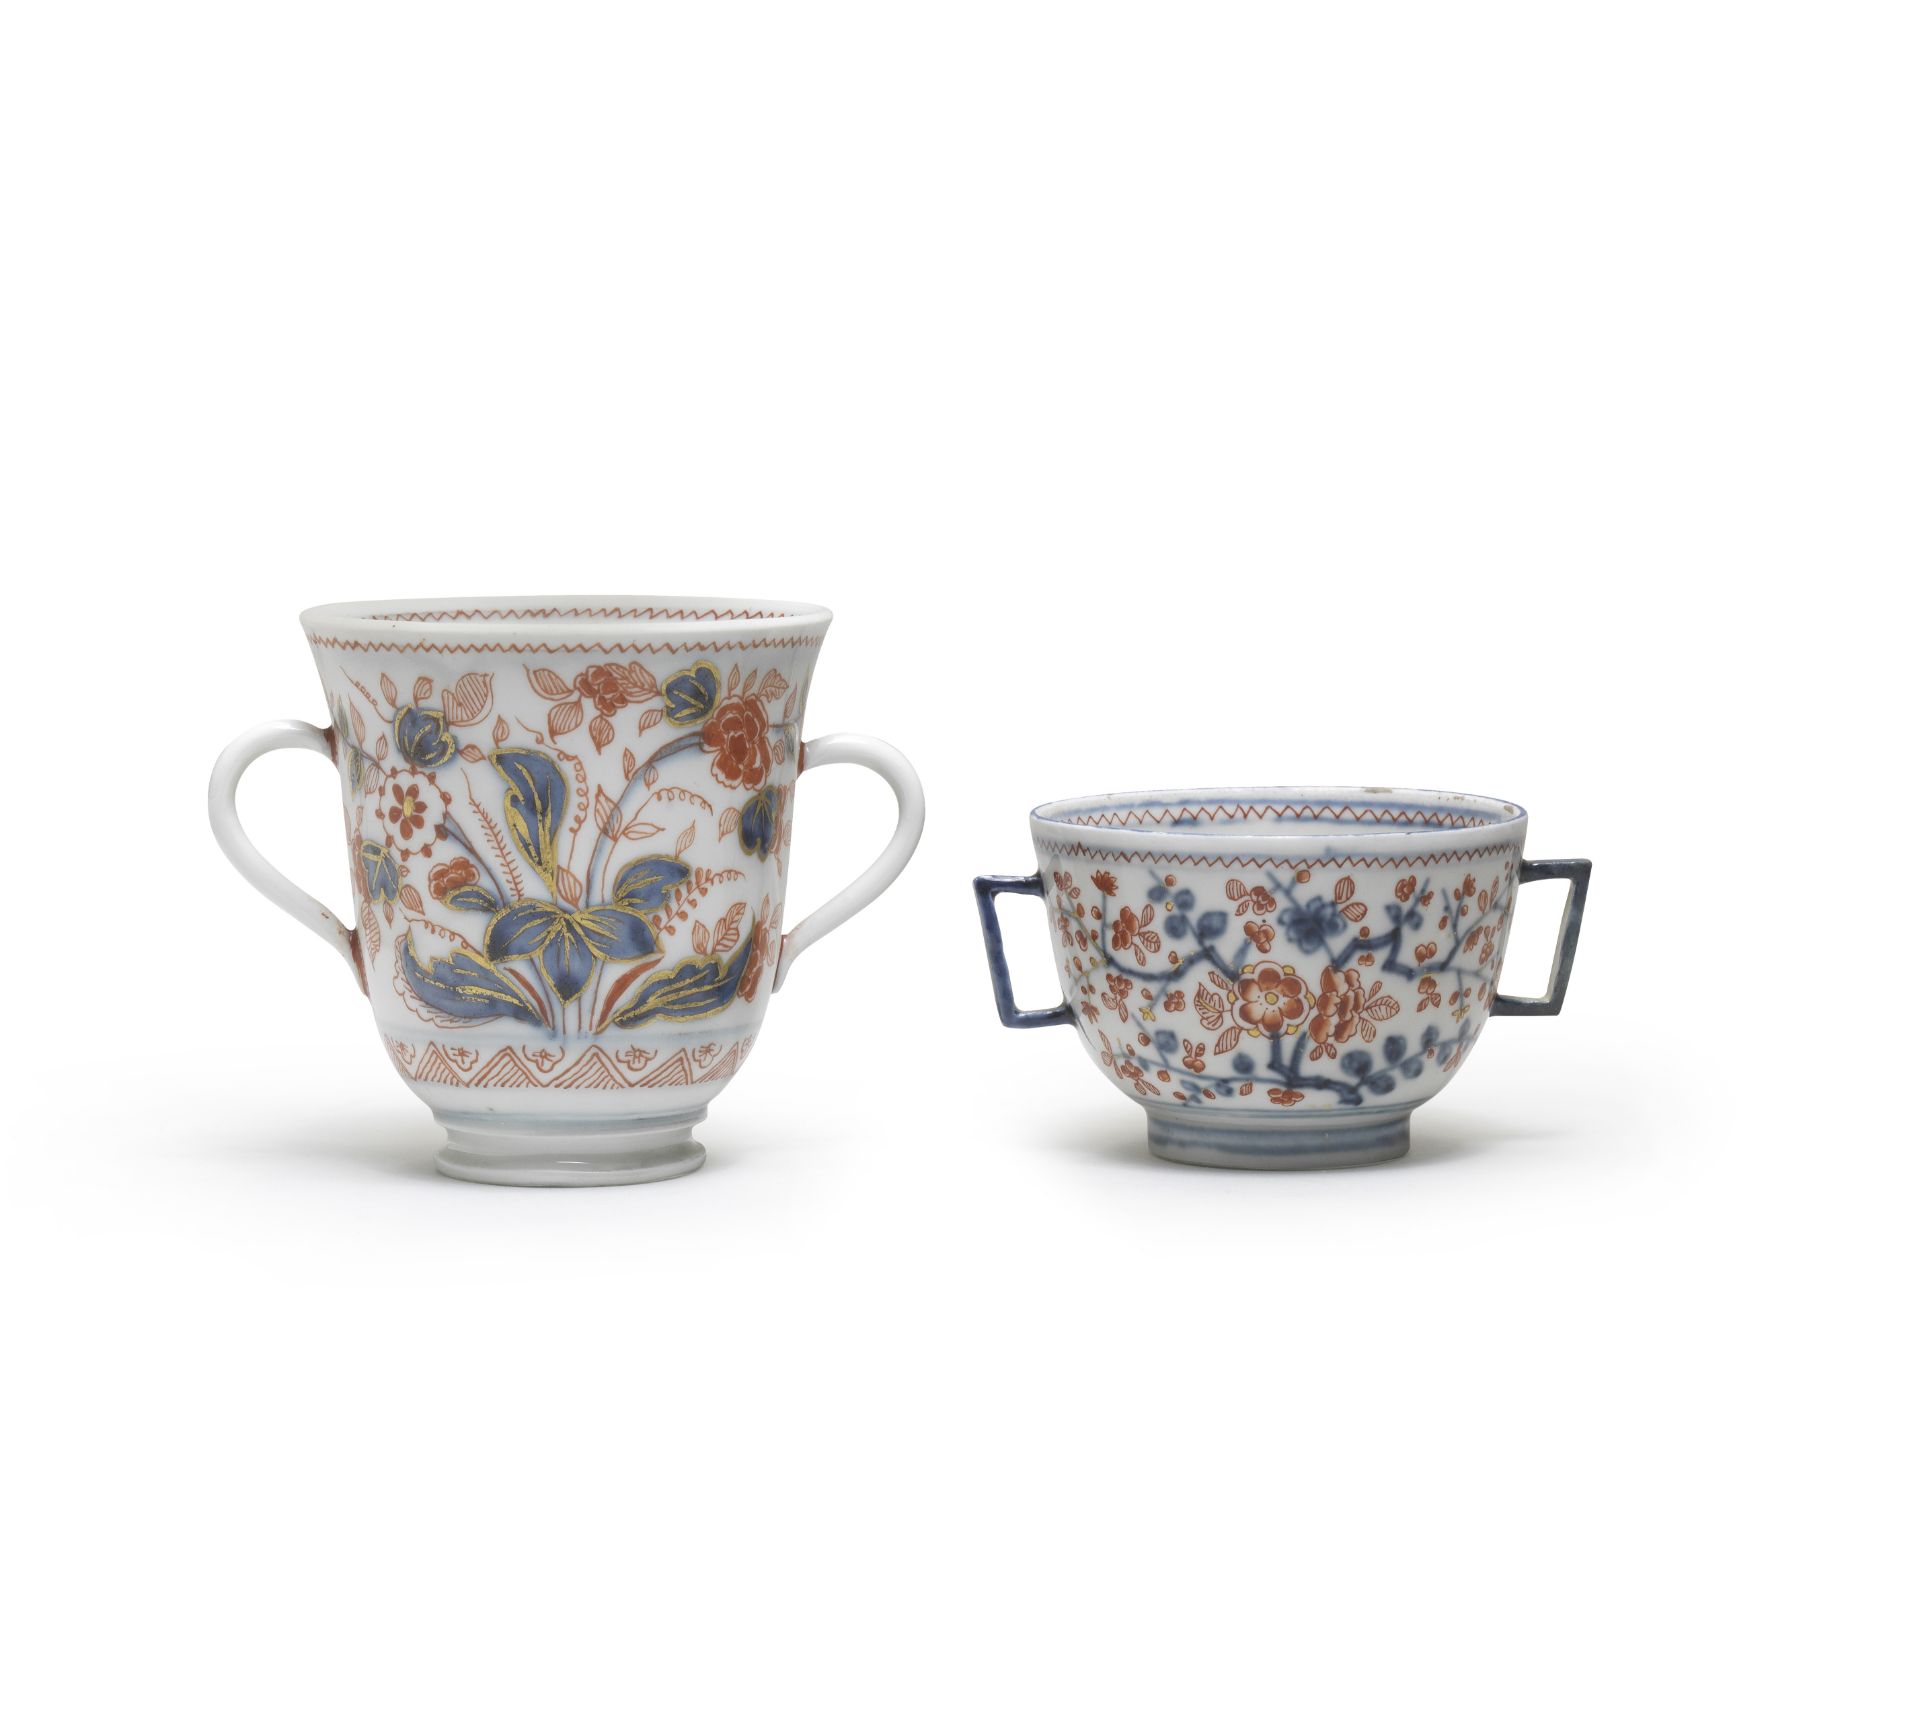 Two Du Paquier two-handled beakers, circa 1725-30